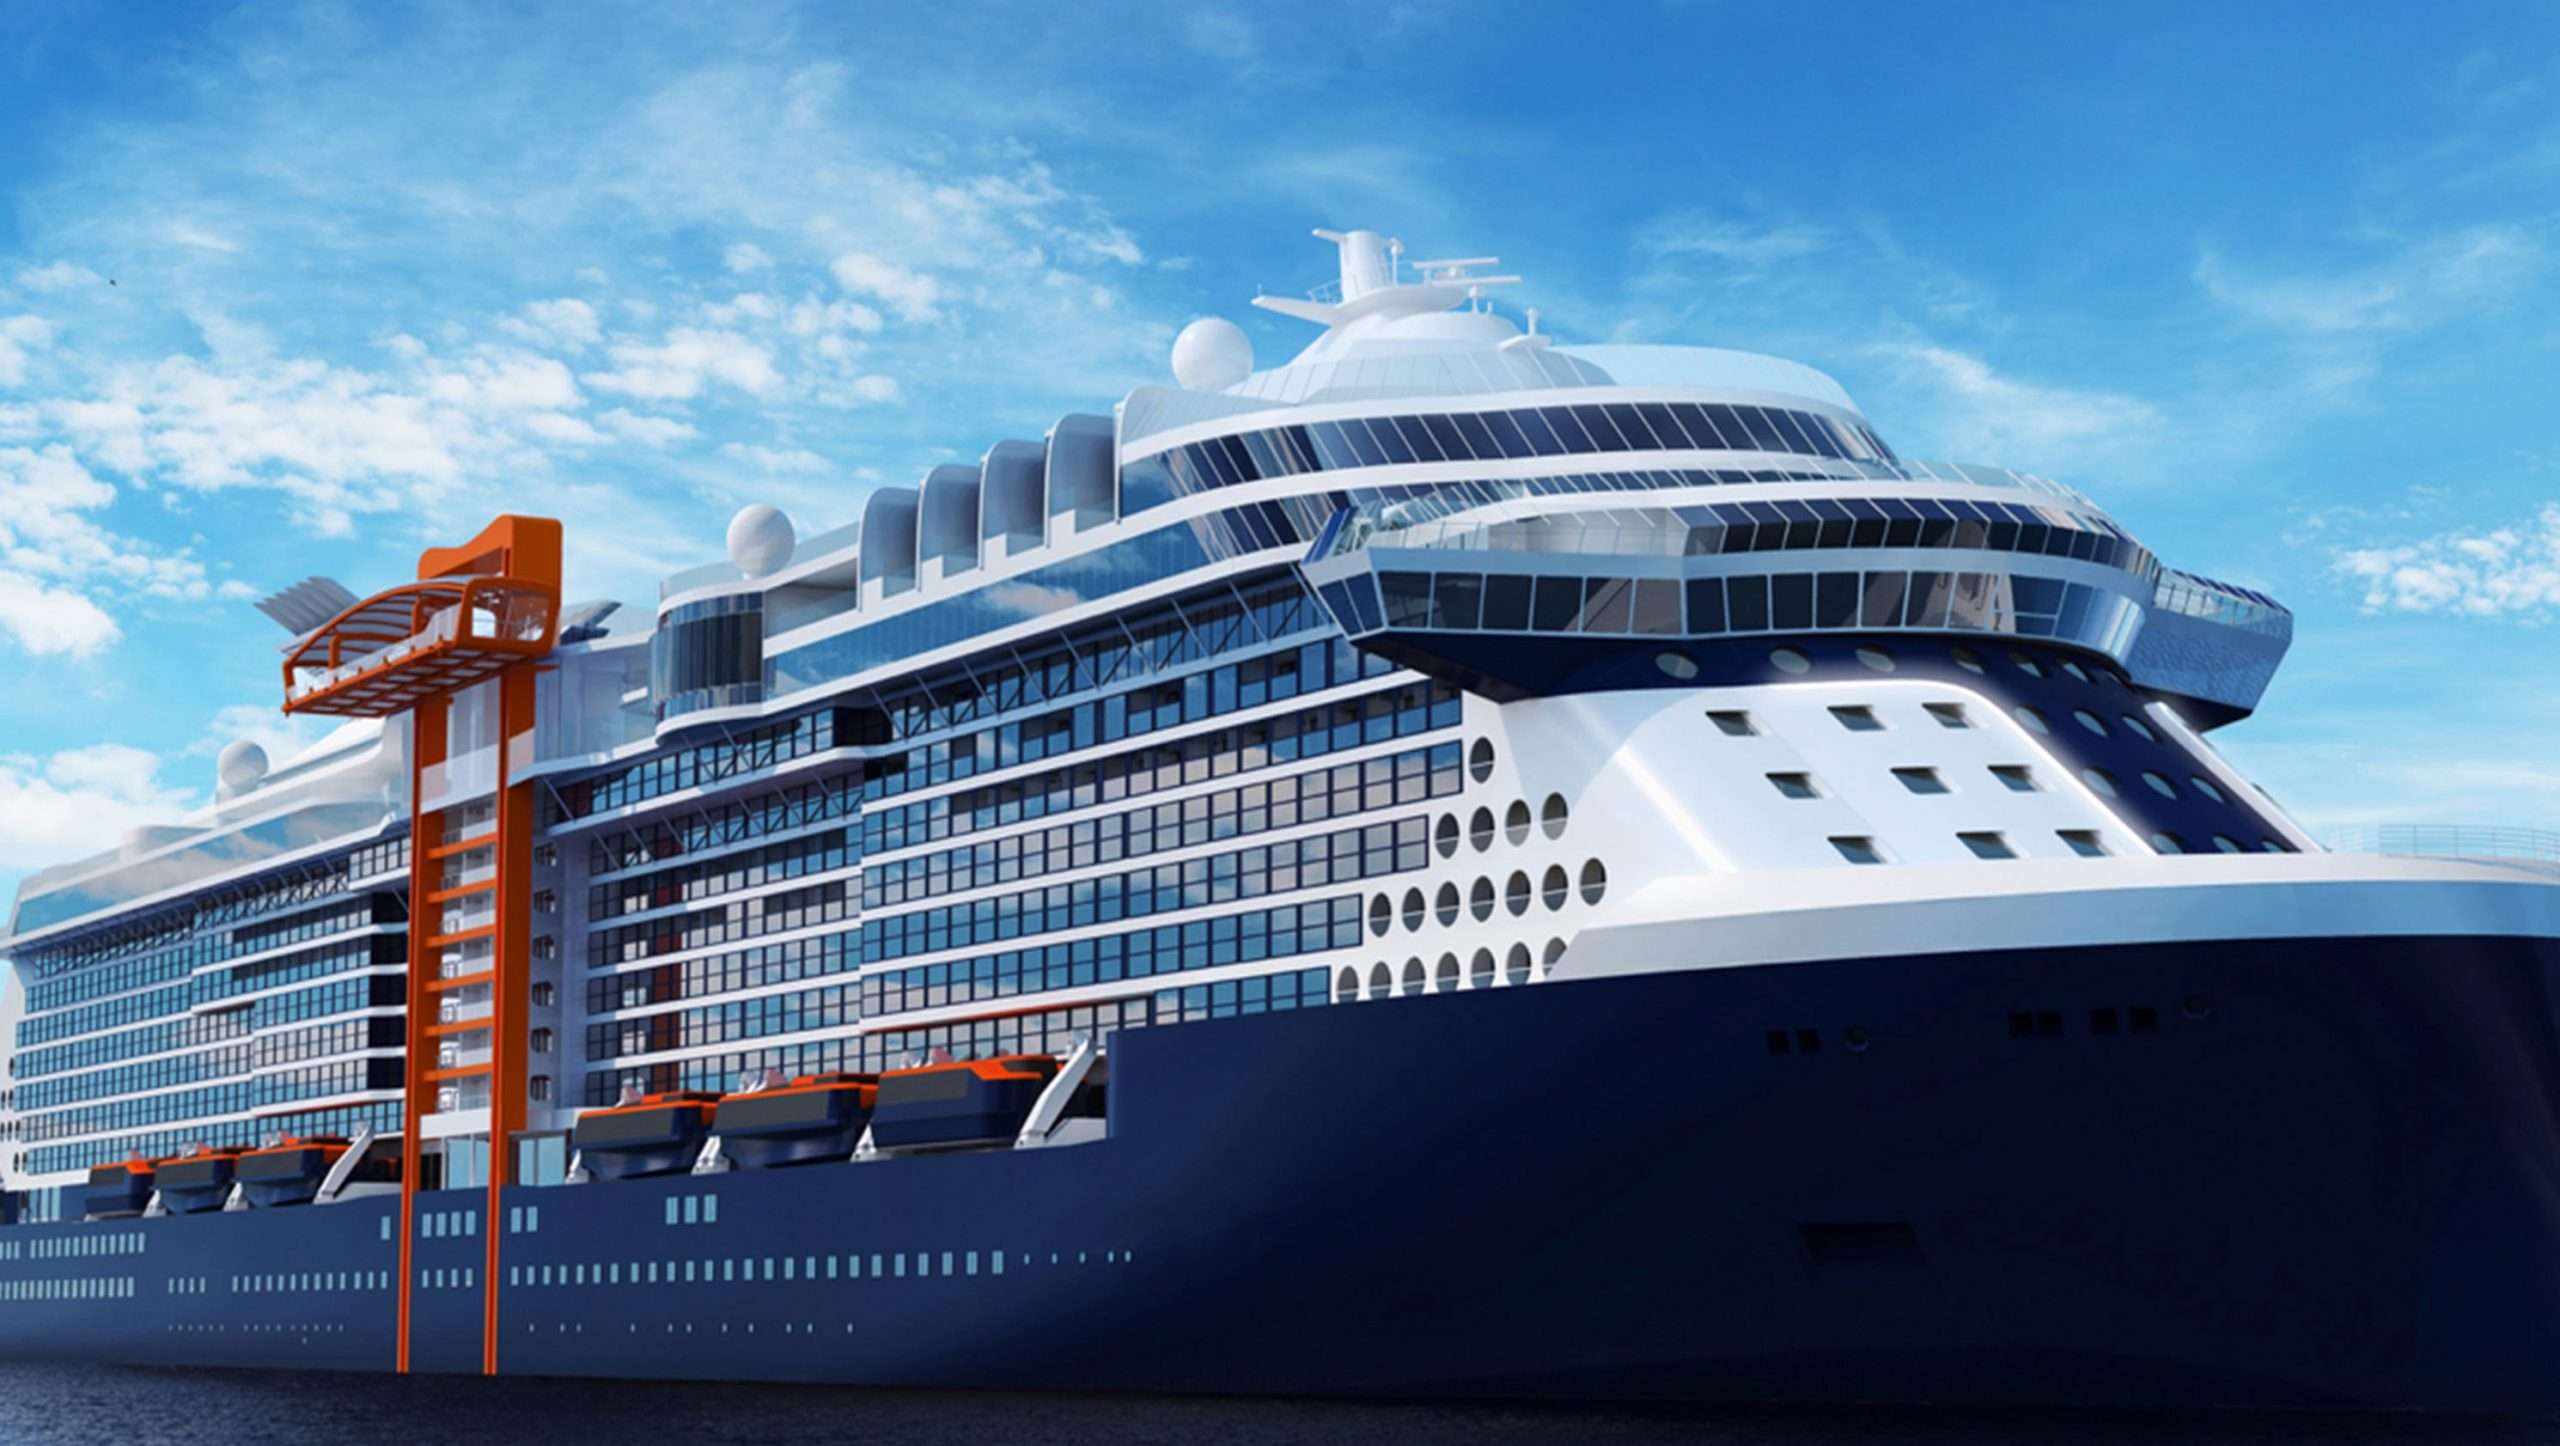 Celebrity Edge: New cruise ship for 2018